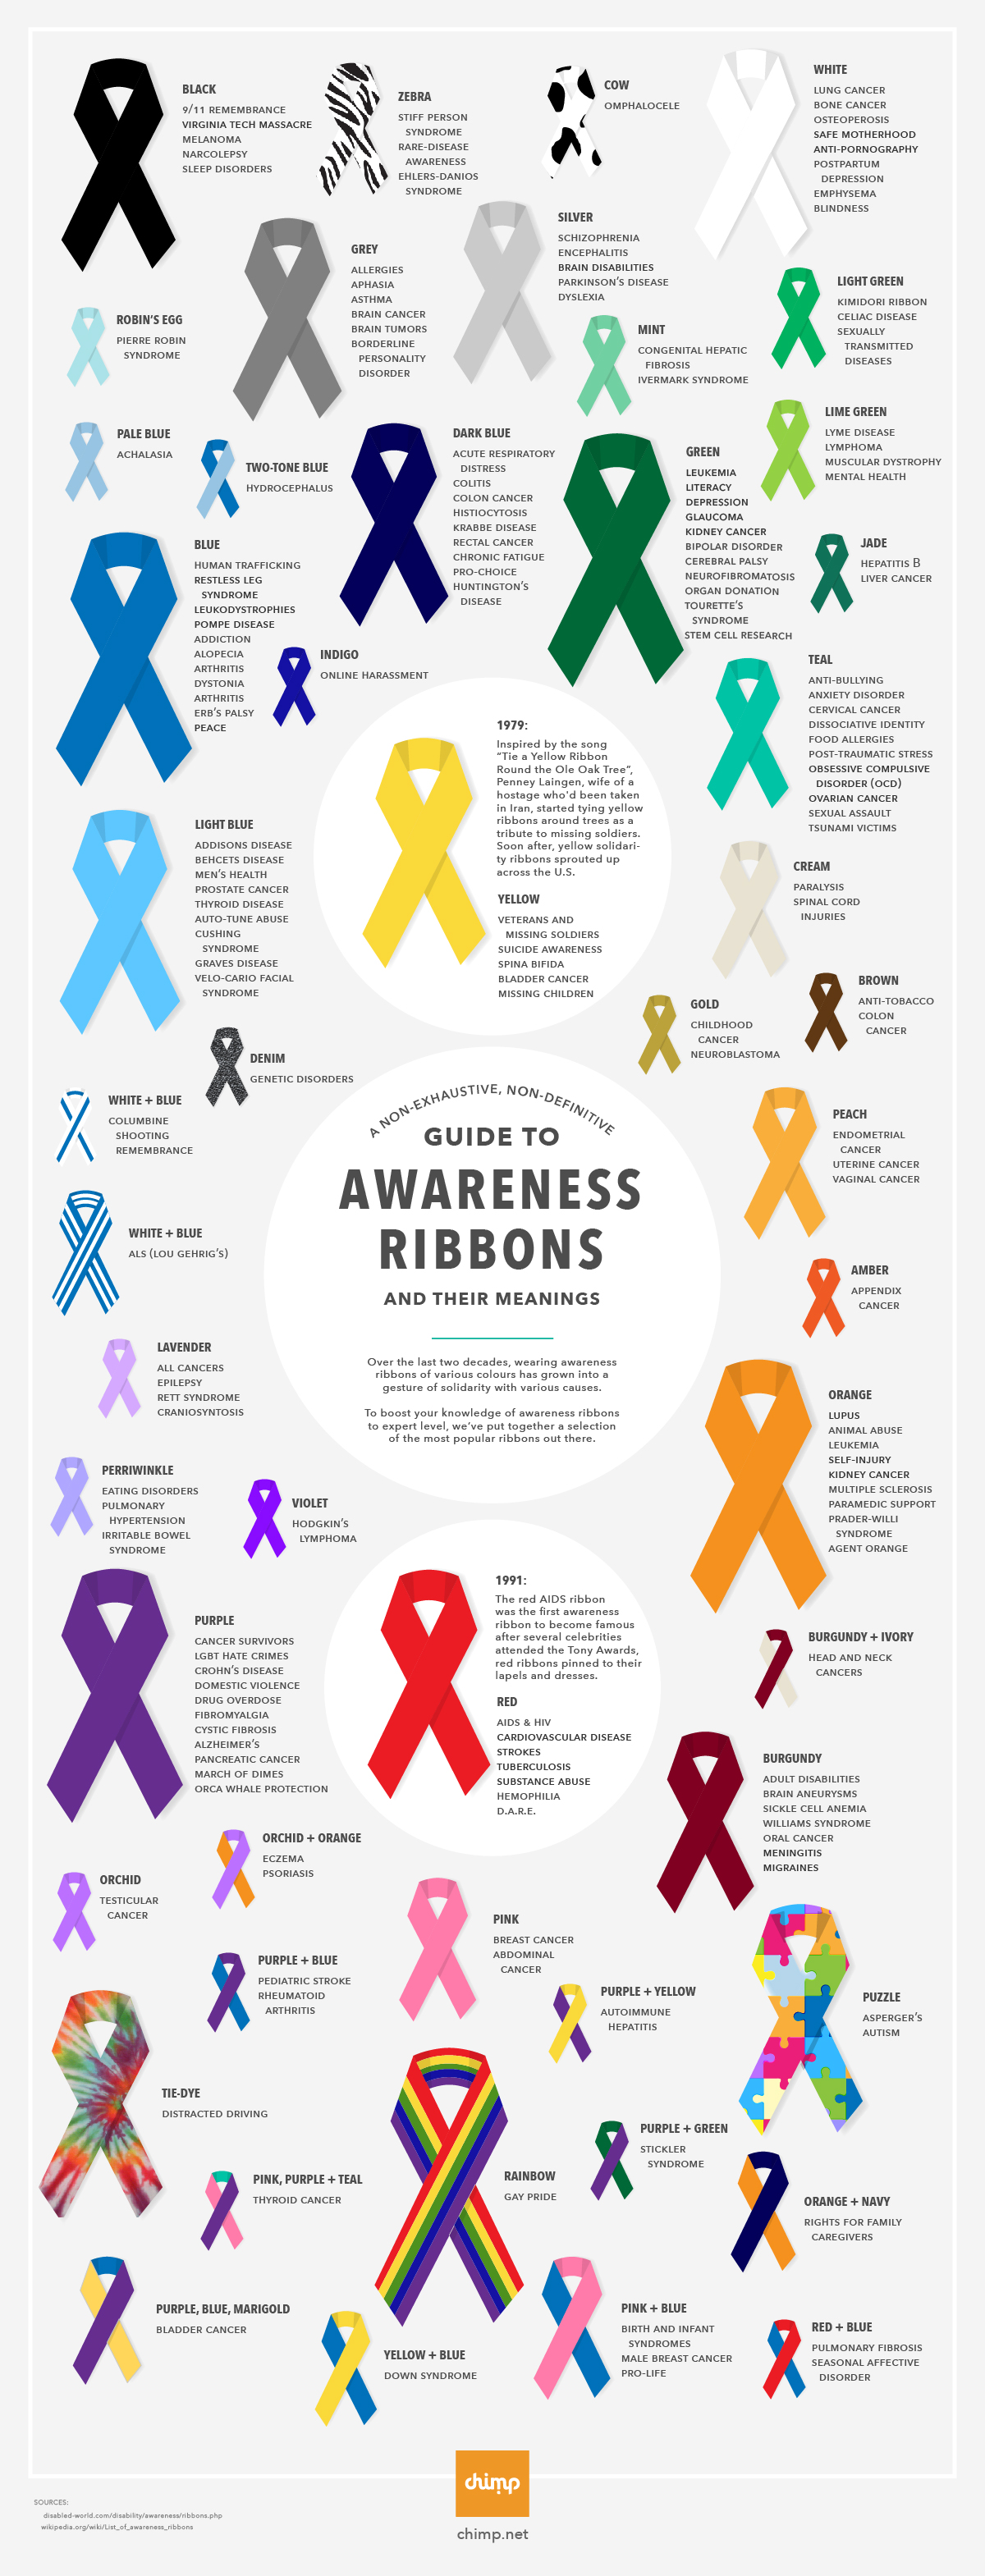 Awareness Ribbons And Their Meanings 55ca34a839f96 